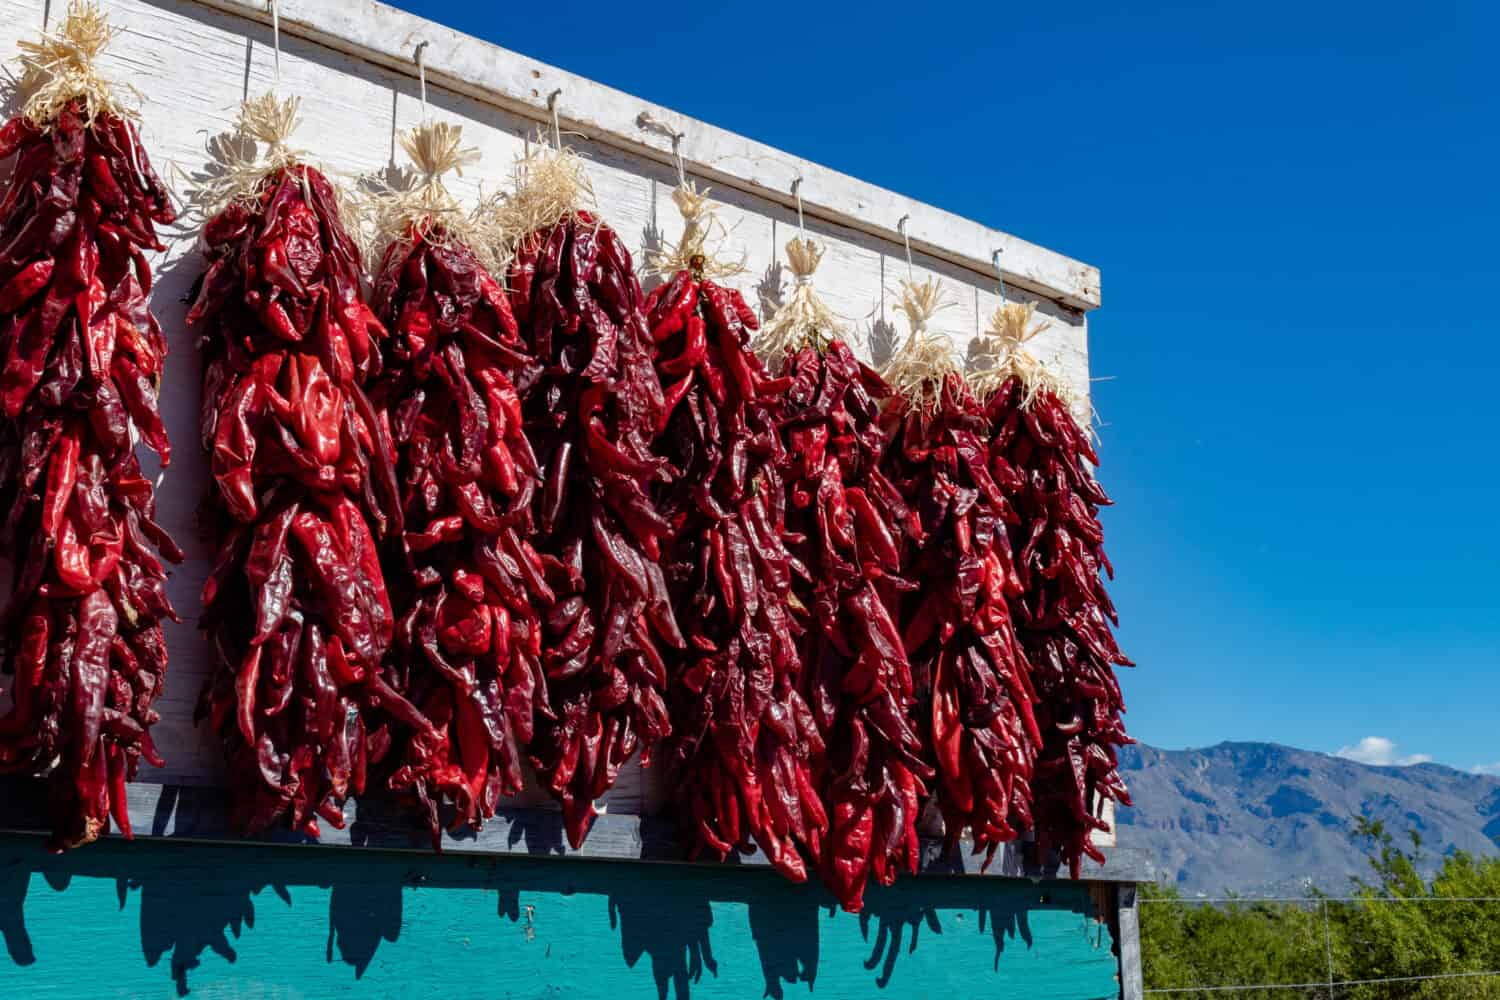 Bundles of fresh ripe red Hatch Chili Peppers freshly picked and hanging to dry on the side of a white board with a turquoise panel, with mountains and a blue sky background. Roadside vendor display.